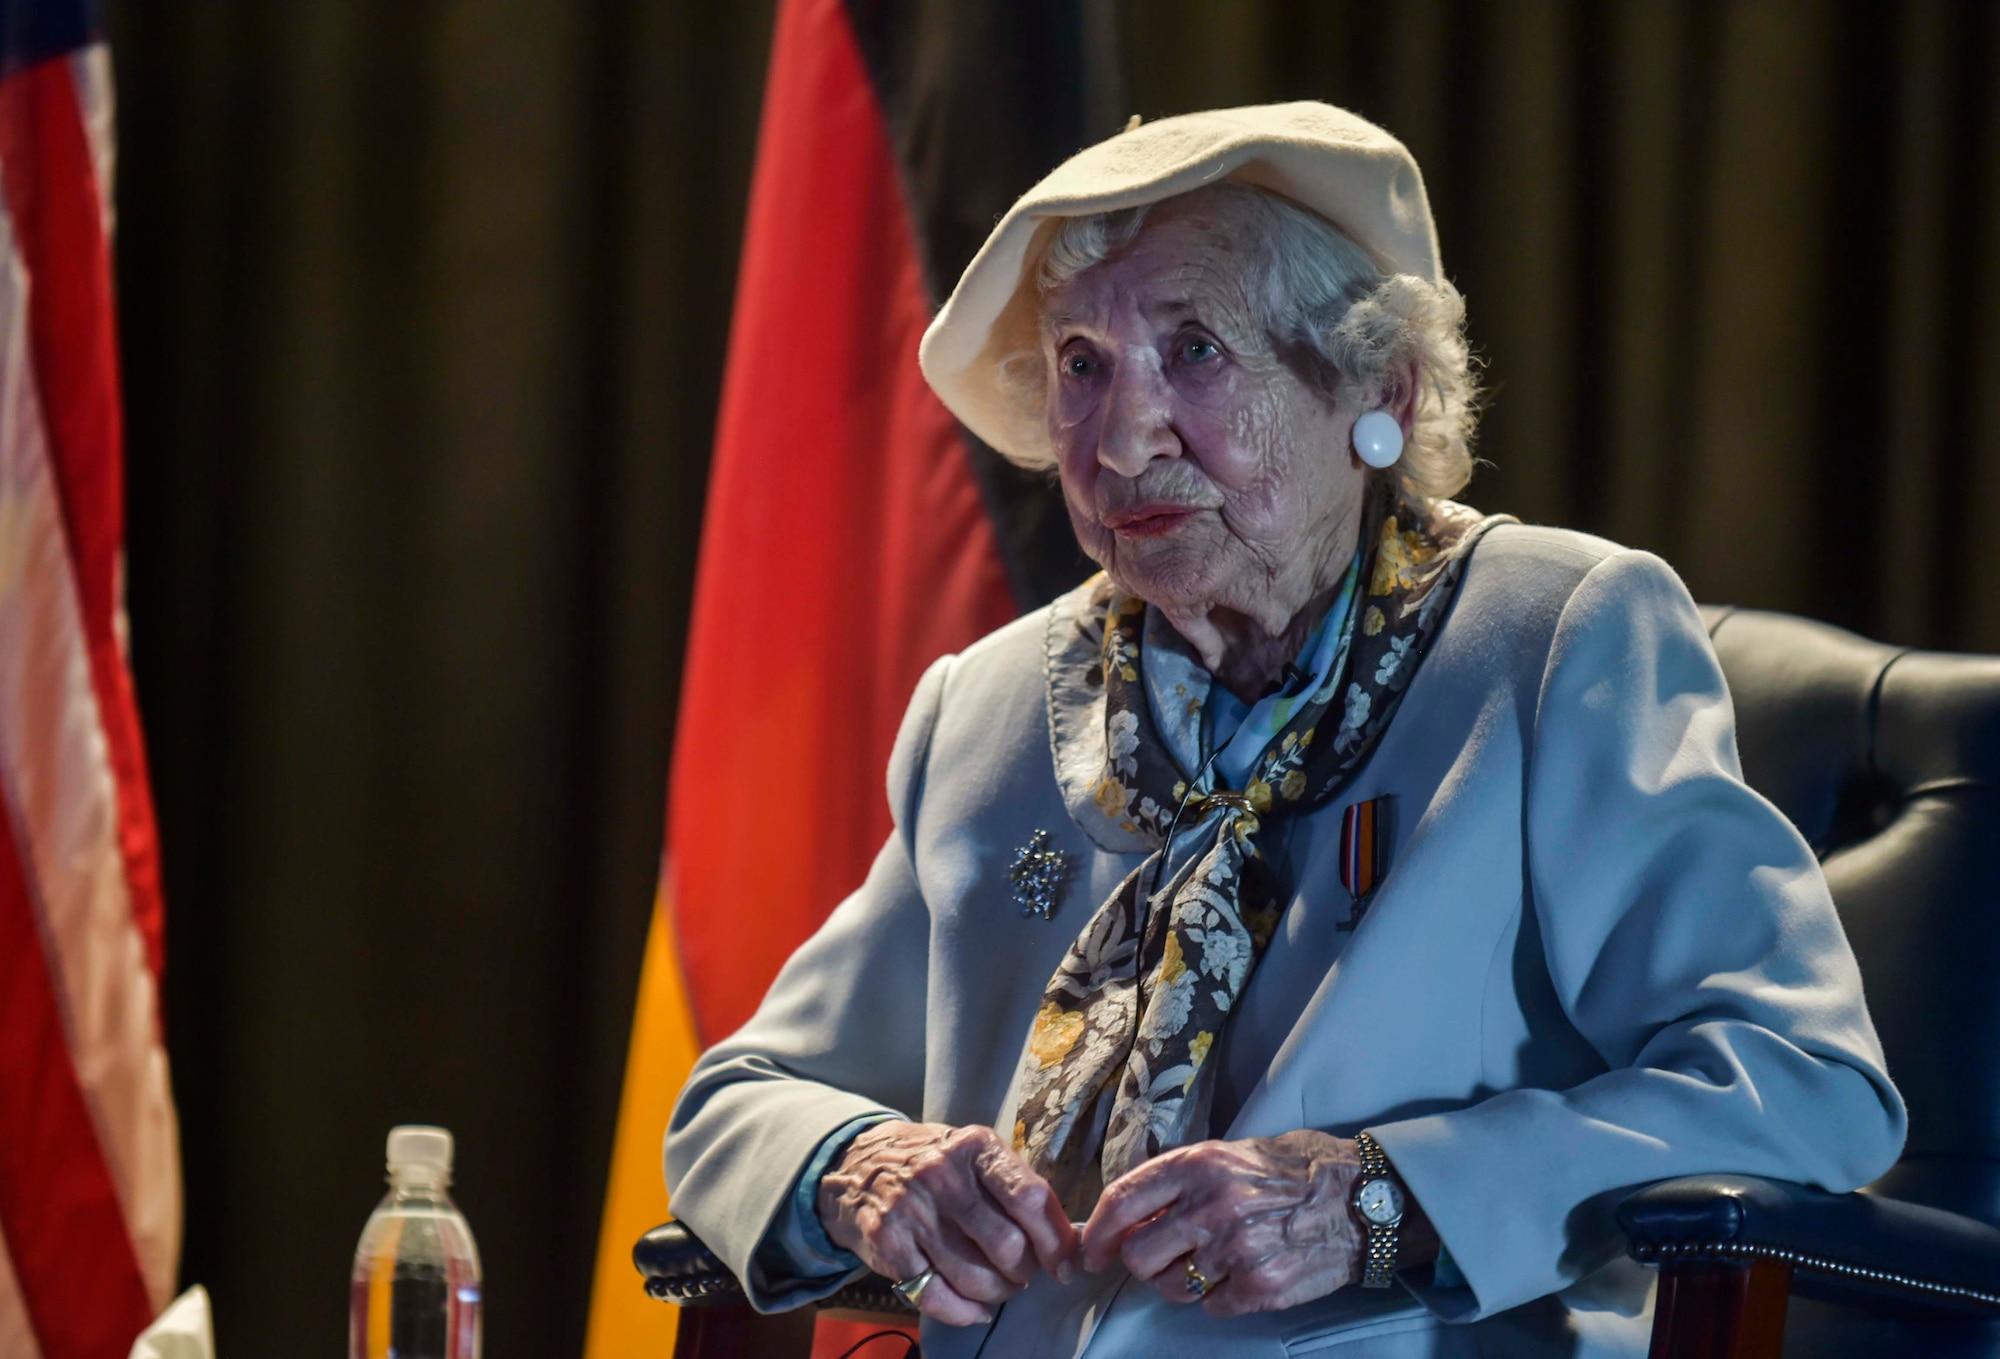 Ms. Selma Van de Perre, 92-year-old Holocaust survivor, speaks to Airmen and their families during a Holocaust remembrance event held at Ramstein Air Base, Germany, May 6, 2016. Hundreds of people attended the event where Van de Perre told her story of how she was a part of the resistance movement against  the Nazis during World War II and ultimately survived a concentration camp. (U.S. Air Force photo/Tech Sgt. Sara Keller) 